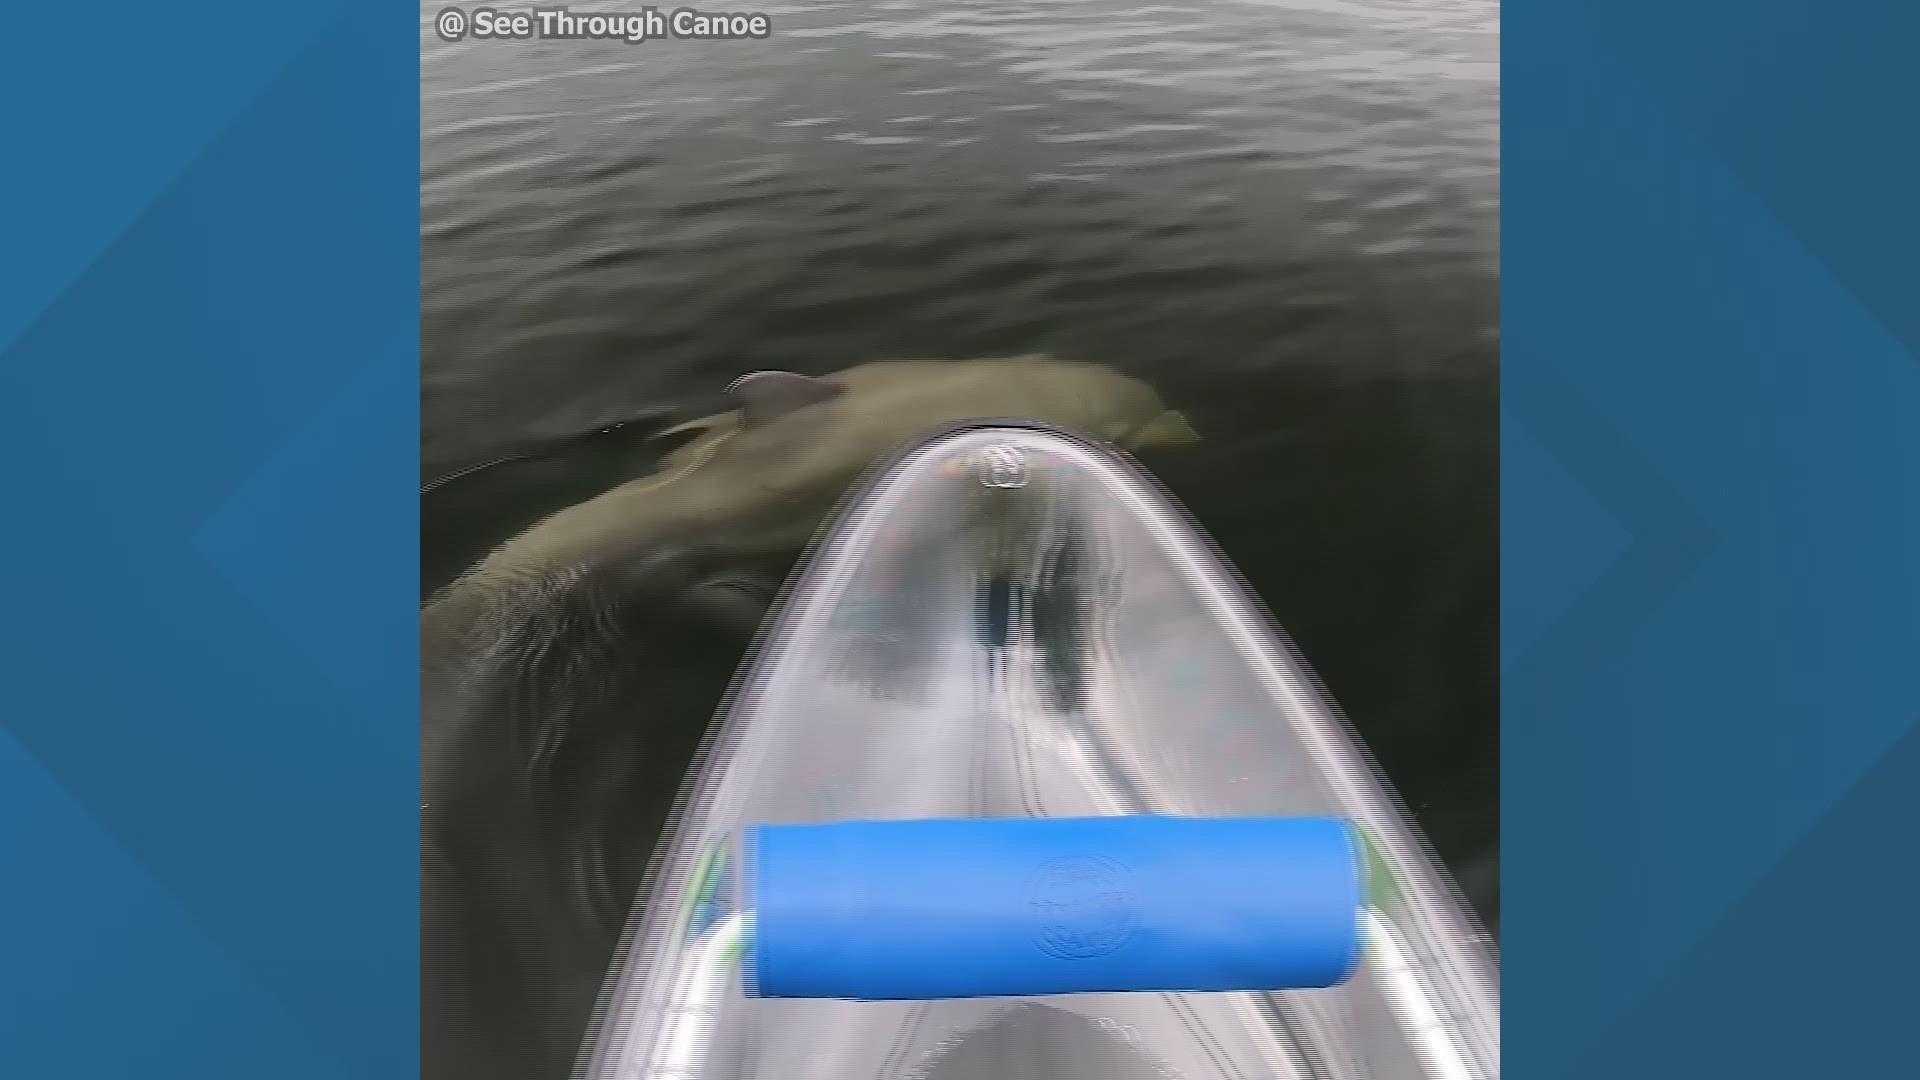 A dolphin got up close and personal as it playfully swam near a Sea Through Canoe.